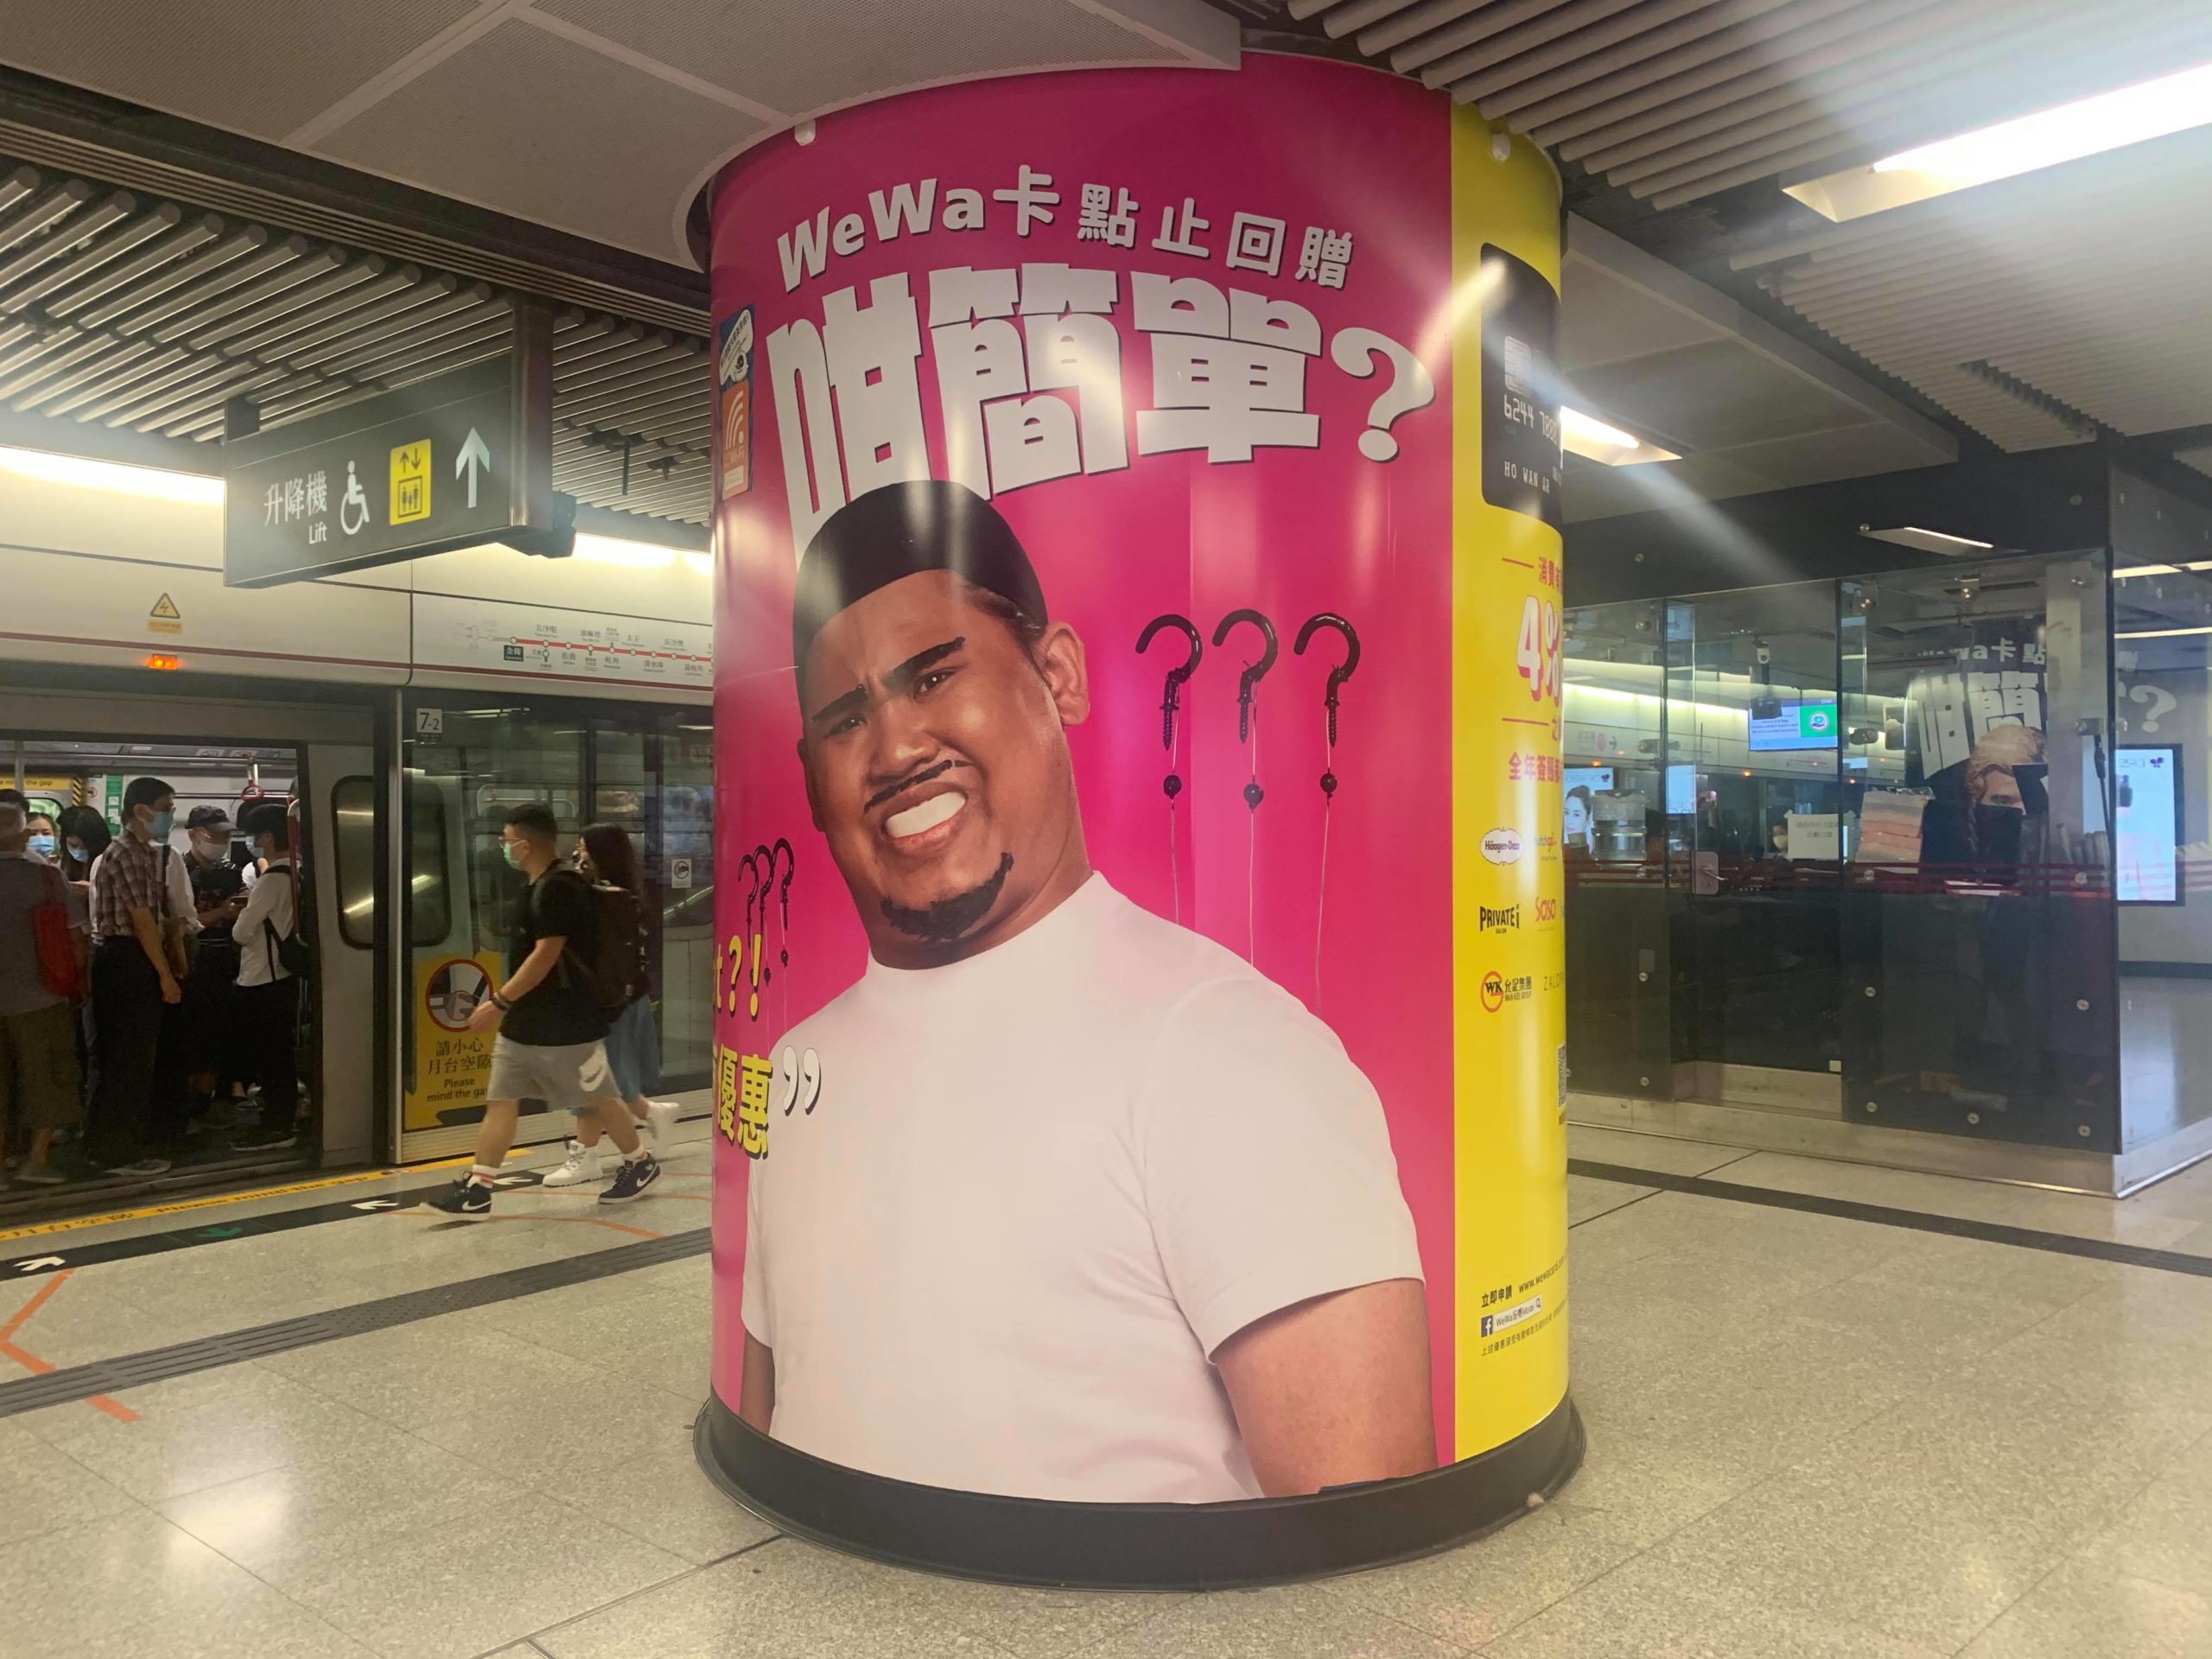 The WeWa advertisement in Admiralty MTR station. Photo: Coconuts Media